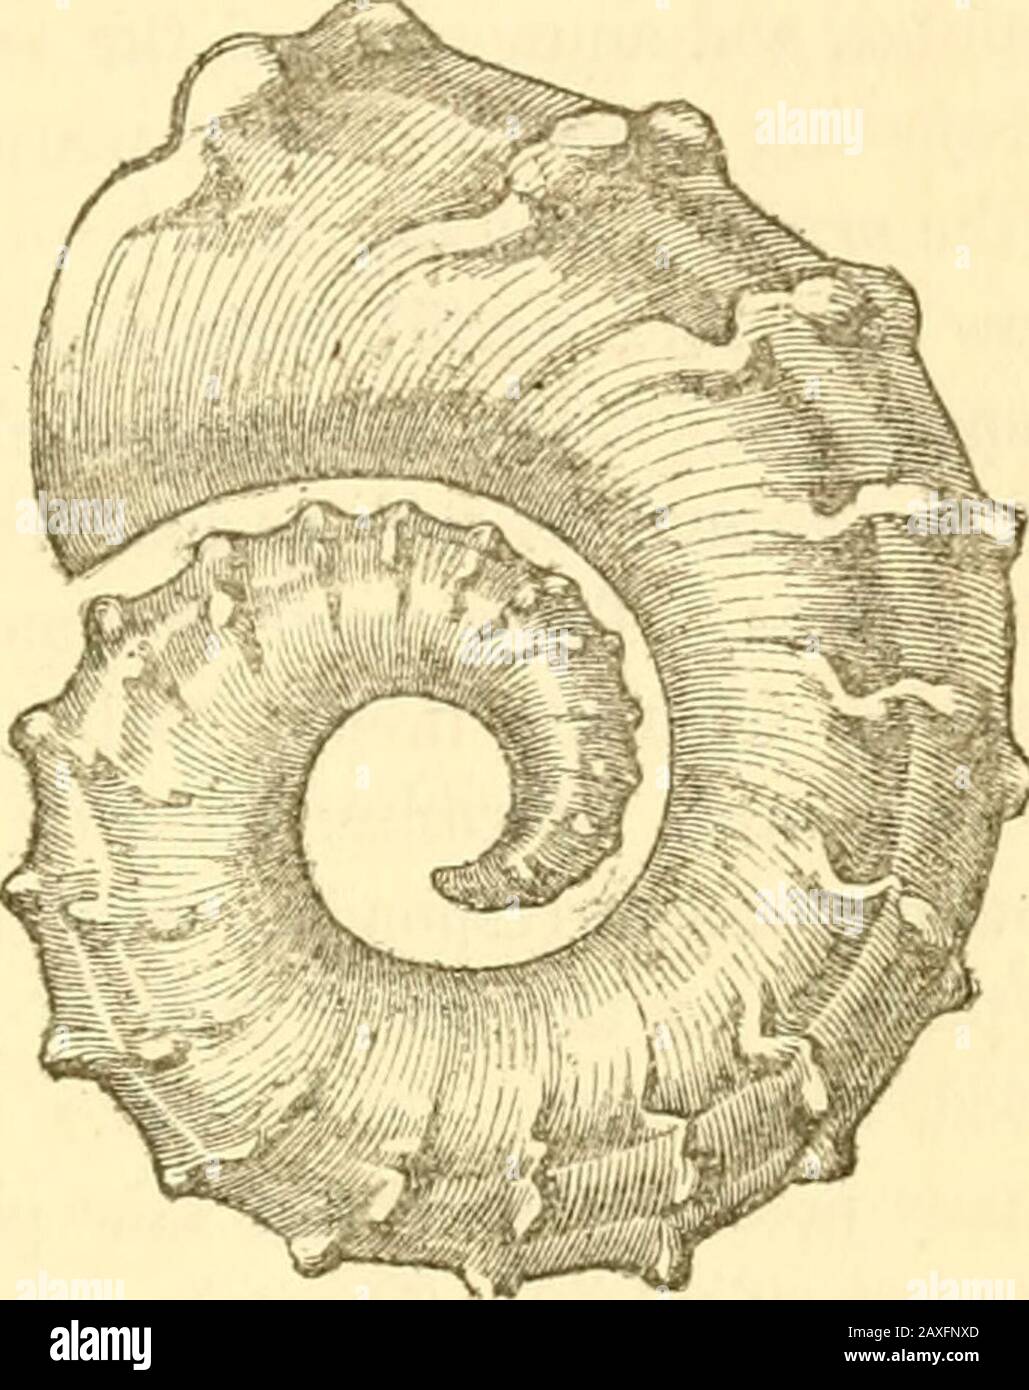 A manual of the Mollusca, or, A rudimentary treatise of recent and fossil shells . Fig. 52.* Gyroceras, Meyer, 1829.Etym., gyros, a circle, and ceras.Hyn., Nautiloceras, DOrb. Ex., G. eifeliense, DArch., pi. XL, fig. 13. Devonian, Eifel.Shell, nautiloid; wMrls separate; siphuncle excentric, radiated.Fossil, 17 sp. U. Silui-ian—Trias ? N. America, and Europe. AscocERAS, Barrande, 1848.tEtym., ascos, a leather bottle.Shell, bent upon itself, like ptychoceras.Distr., 7 sp. U. Silurian, Bohemia. FAMILY III. AMM0XITIDJ5. Shell. Body-chamber elongated; aperture giuivdcd by processes, andclosed by an Stock Photo